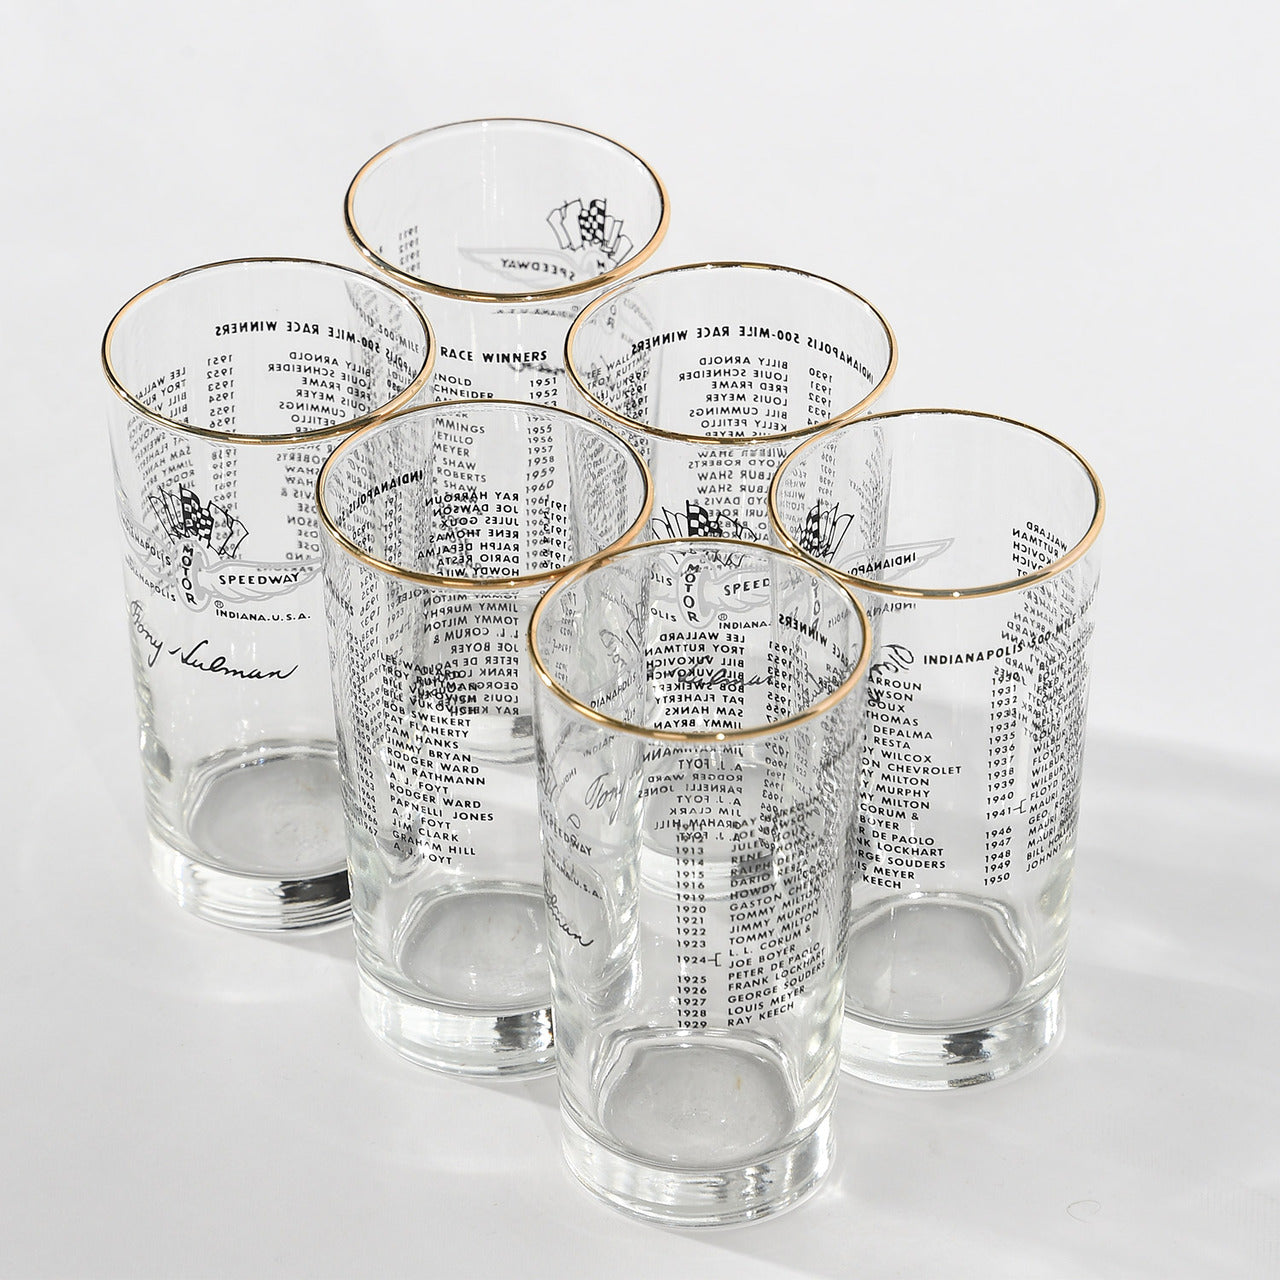 Indianapolis Historical Indy 500 Glassware - 1950 Johnnie Parsons Set